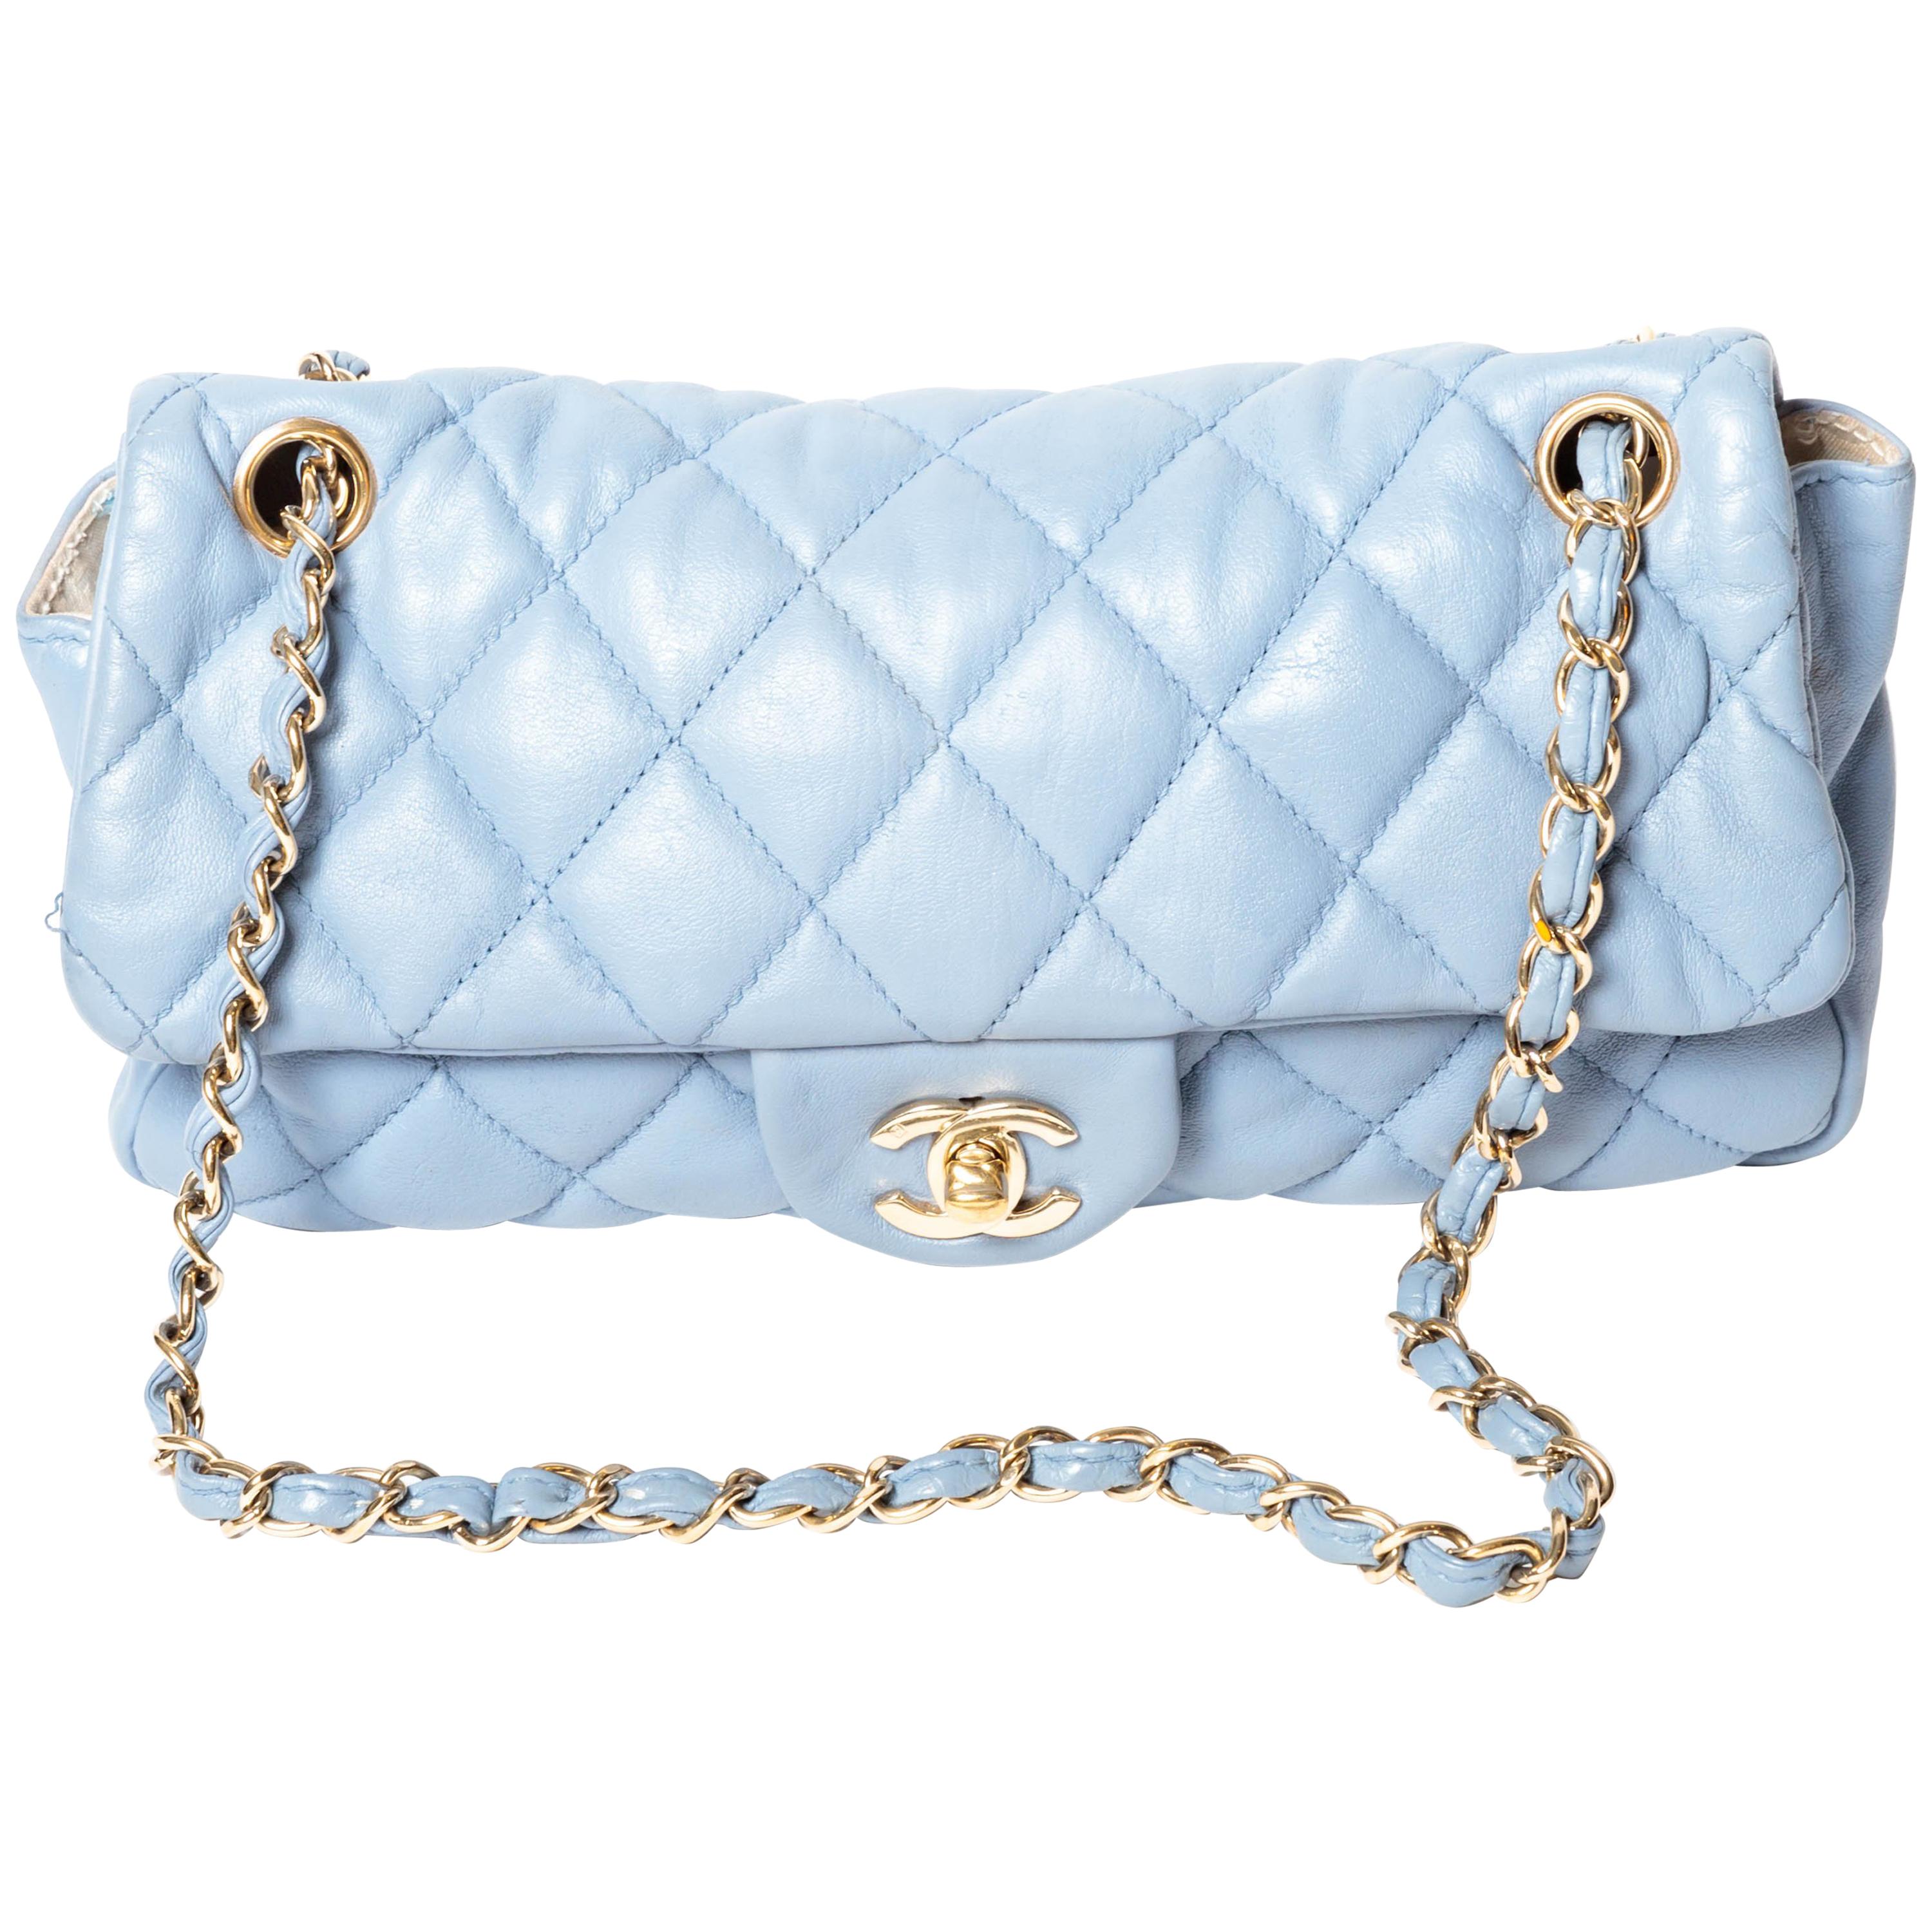 Chanel Powder Blue Single Flap with Gold Hardware - 2005 - 2006 Collection For Sale